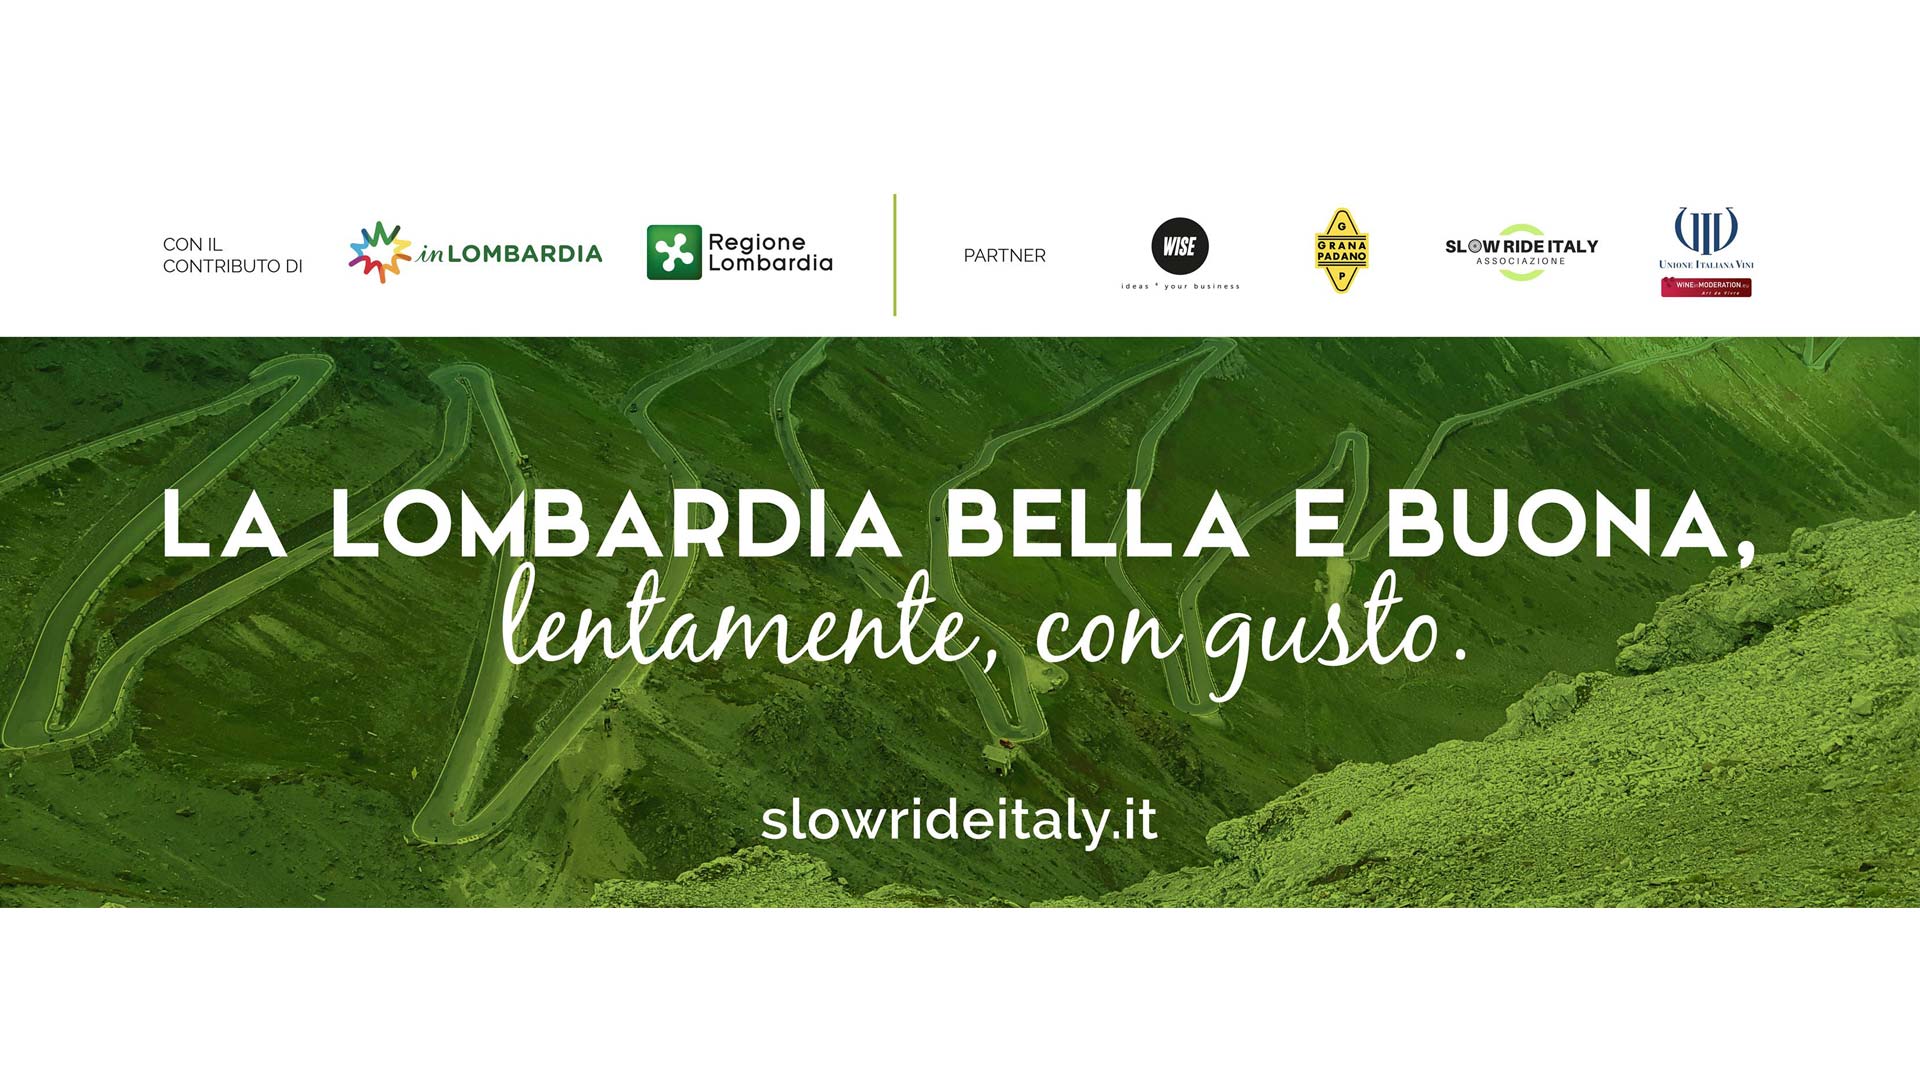 slow bike ride italy motoreetto presents food tourism in Lombardy